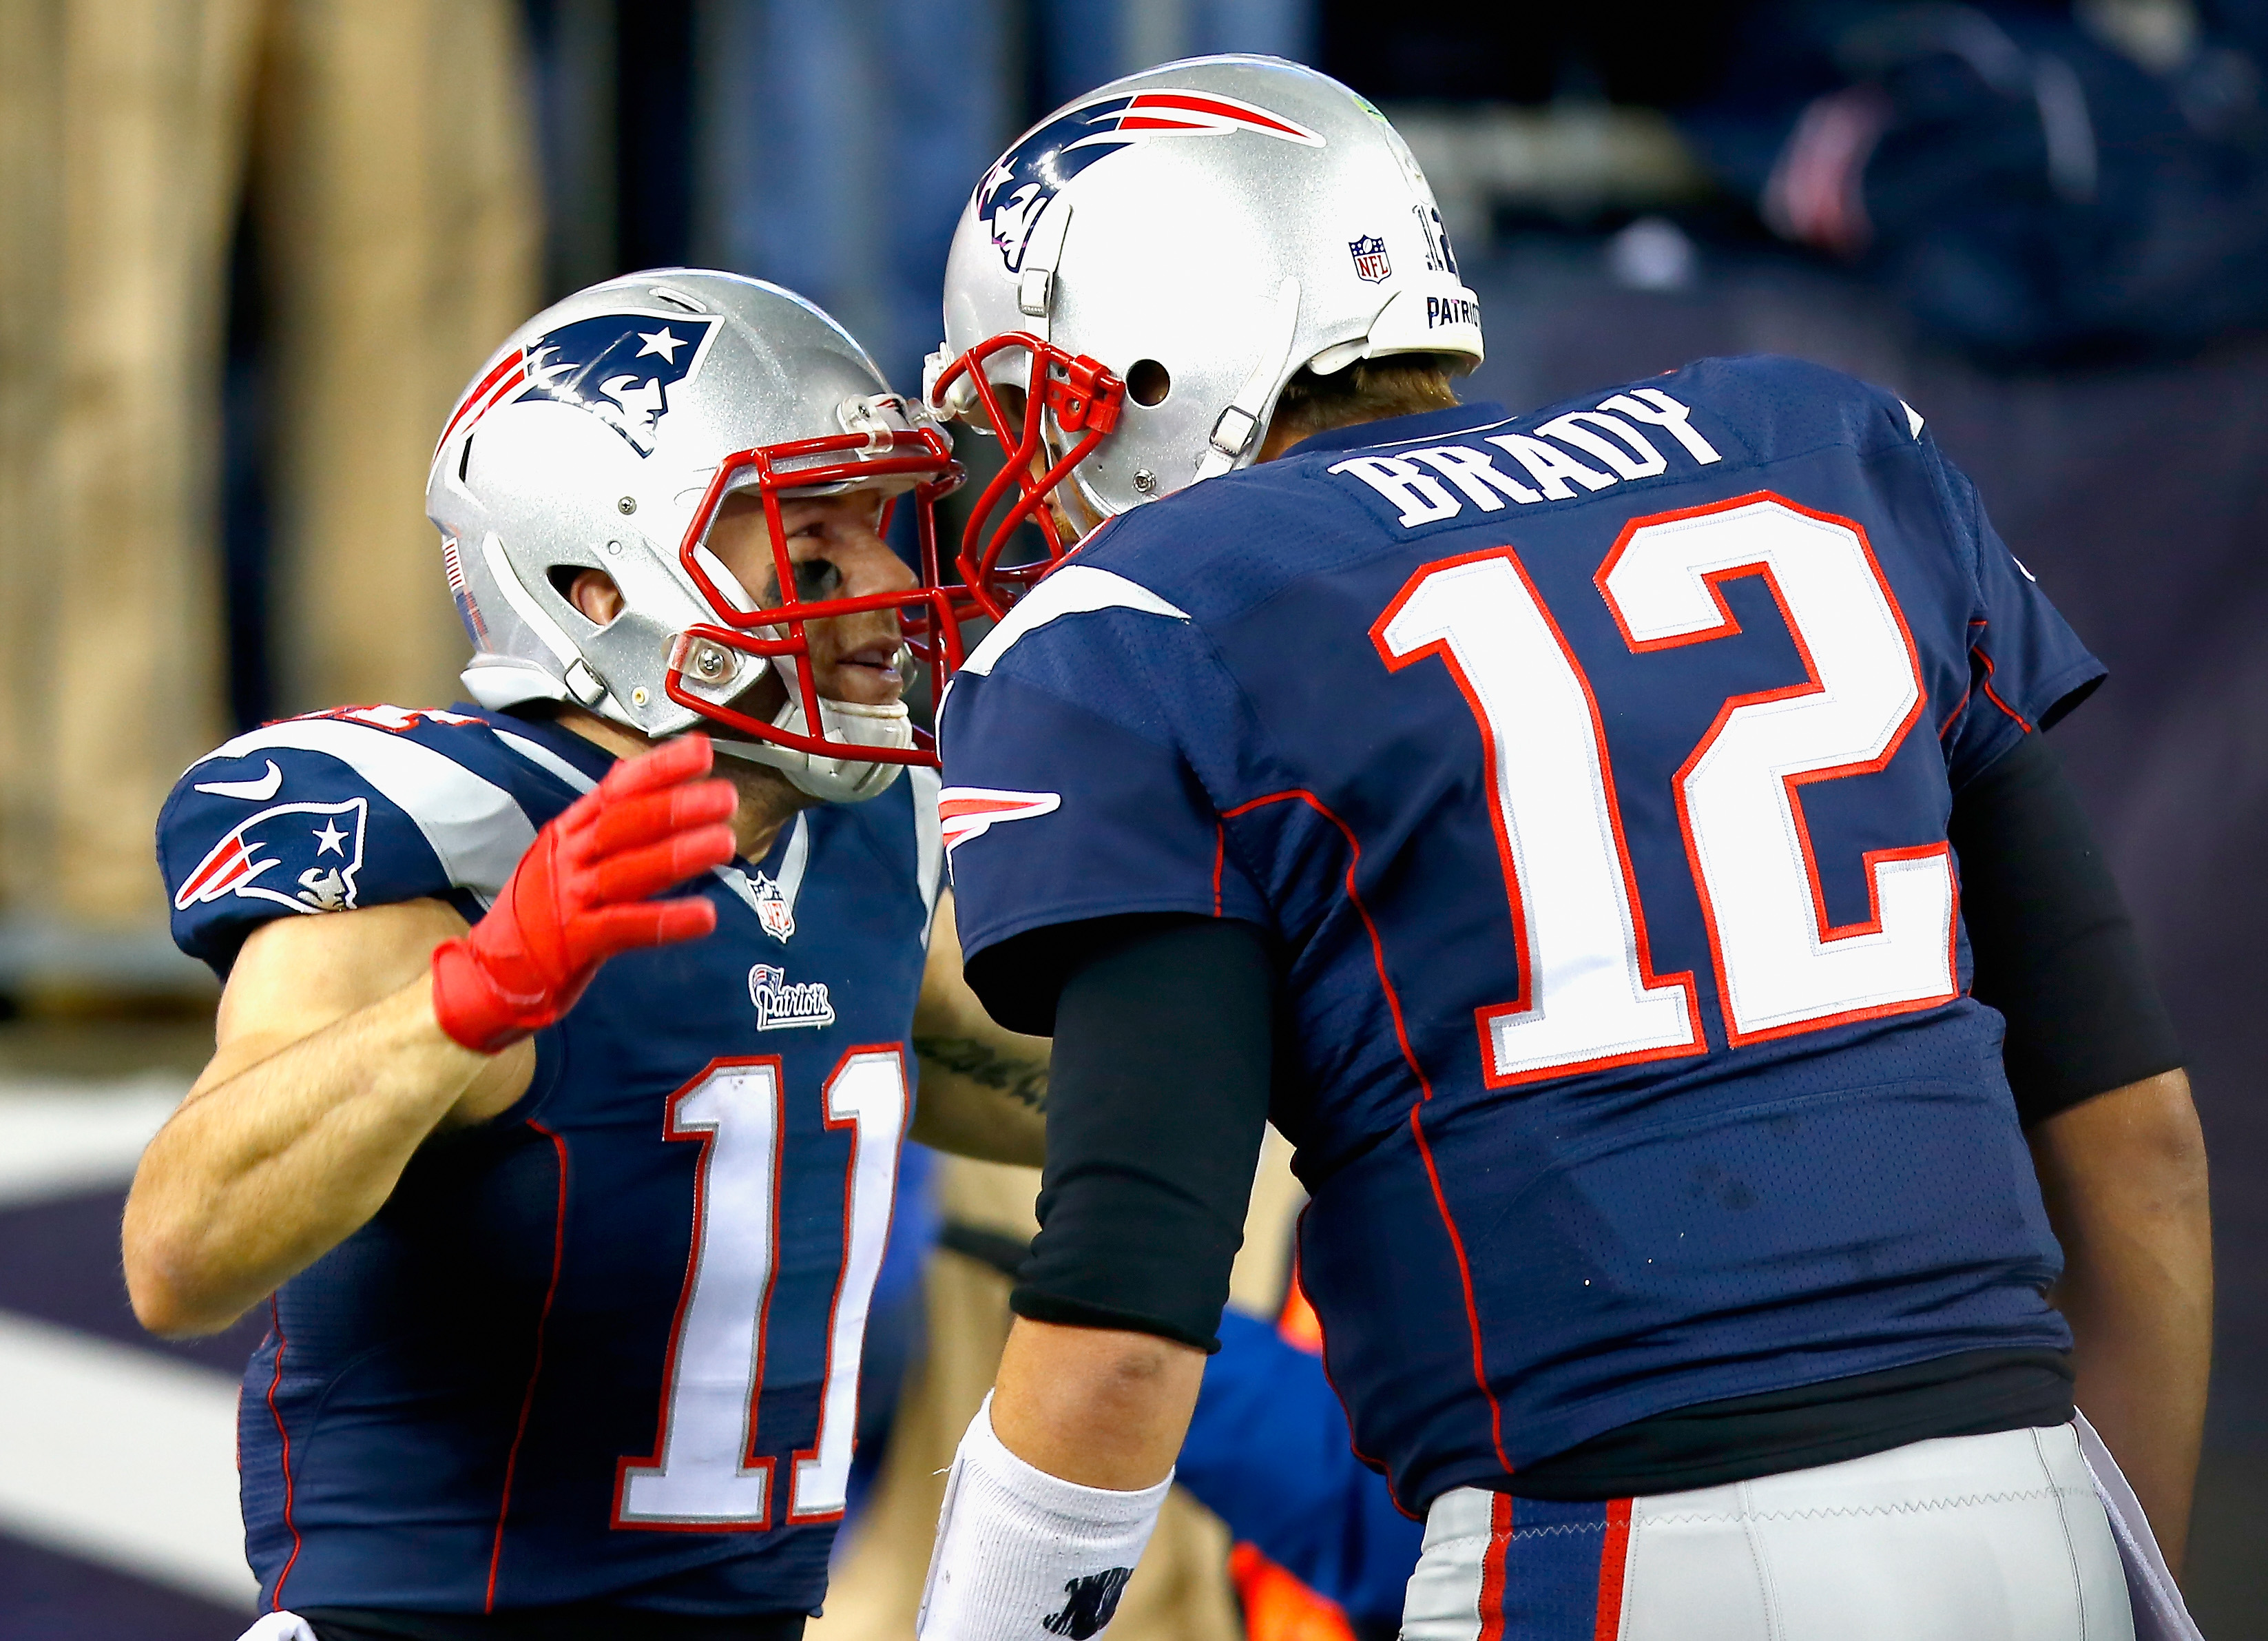 FOXBORO, MA - NOVEMBER 02: Julian Edelman #11 of the New England Patriots reacts alongside Tom Brady #12 after returning a kick for a touchdown during the second quarter against the Denver Broncos at Gillette Stadium on November 2, 2014 in Foxboro, Massachusetts. (Photo by Jared Wickerham/Getty Images)